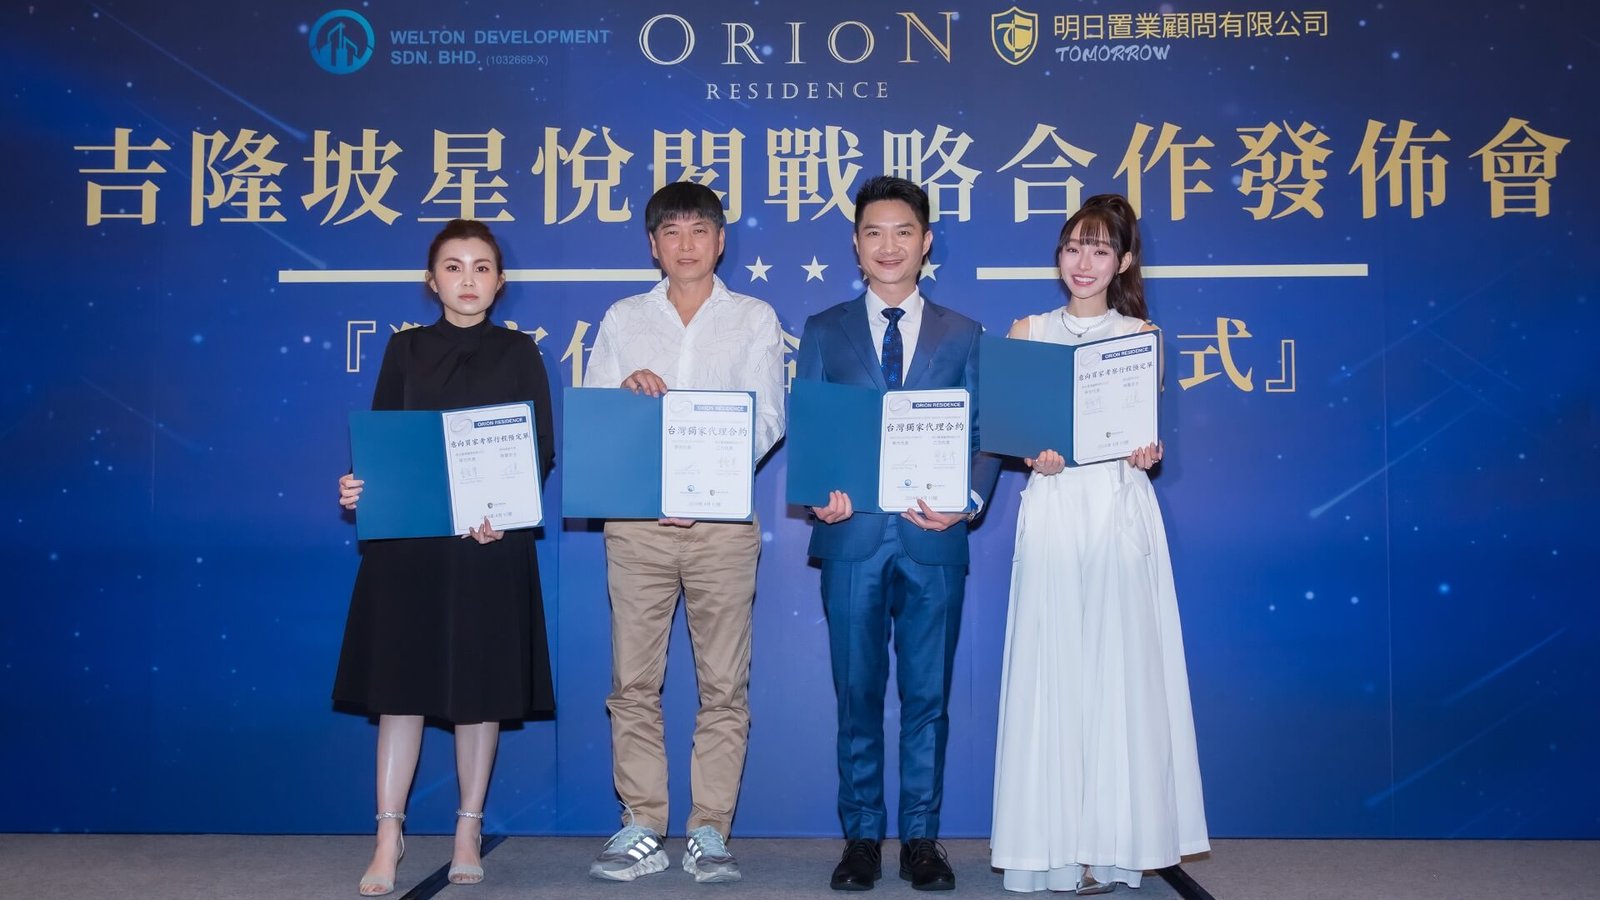 Signing Ceremony of Orion